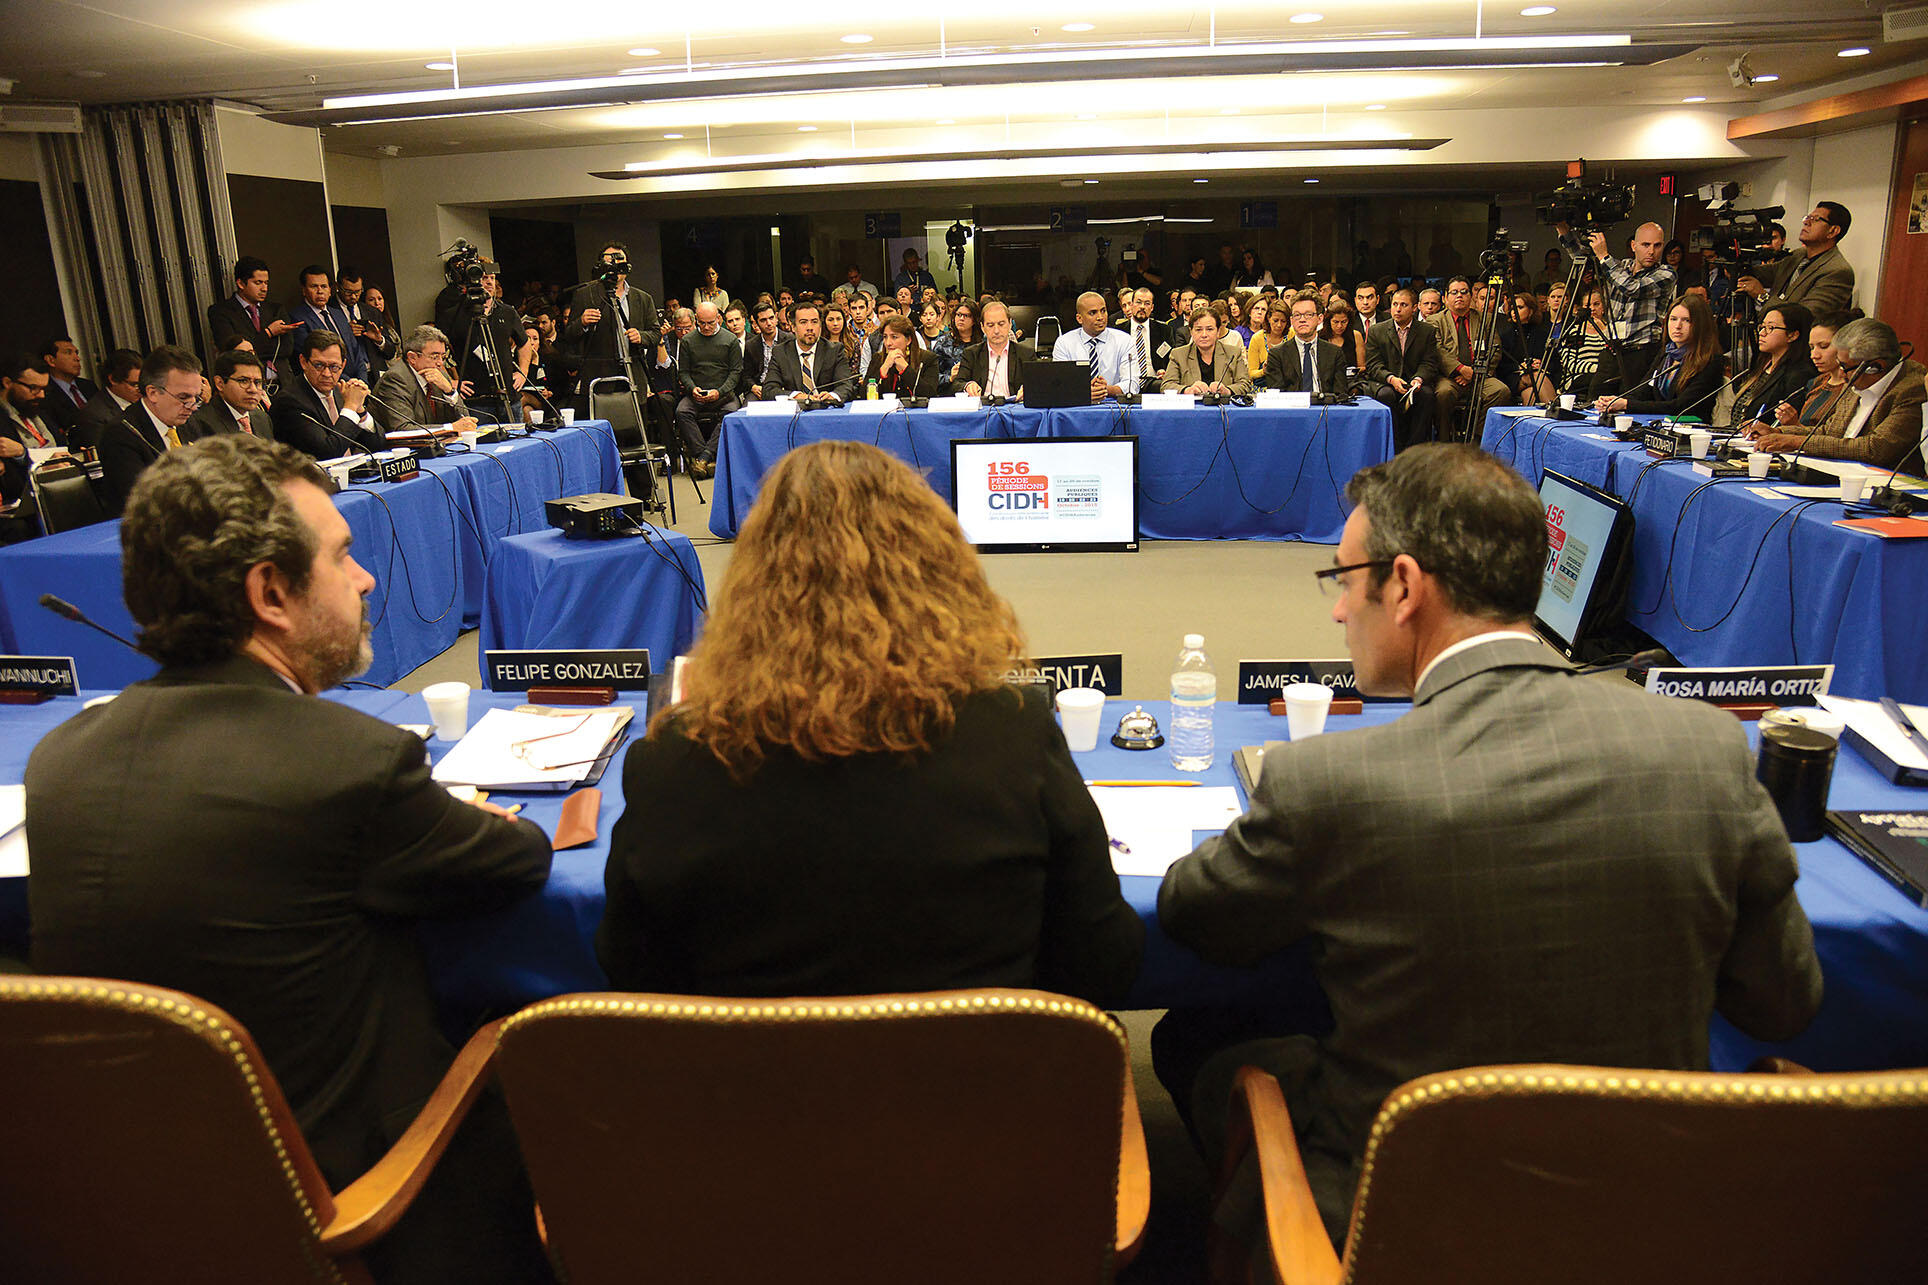 The Grupo Interdisciplinario de Expertos Independientes (GIEI) presents an initial report in October 2015 in a packed conference room. (Photo by Daniel Cima/CIDH.)